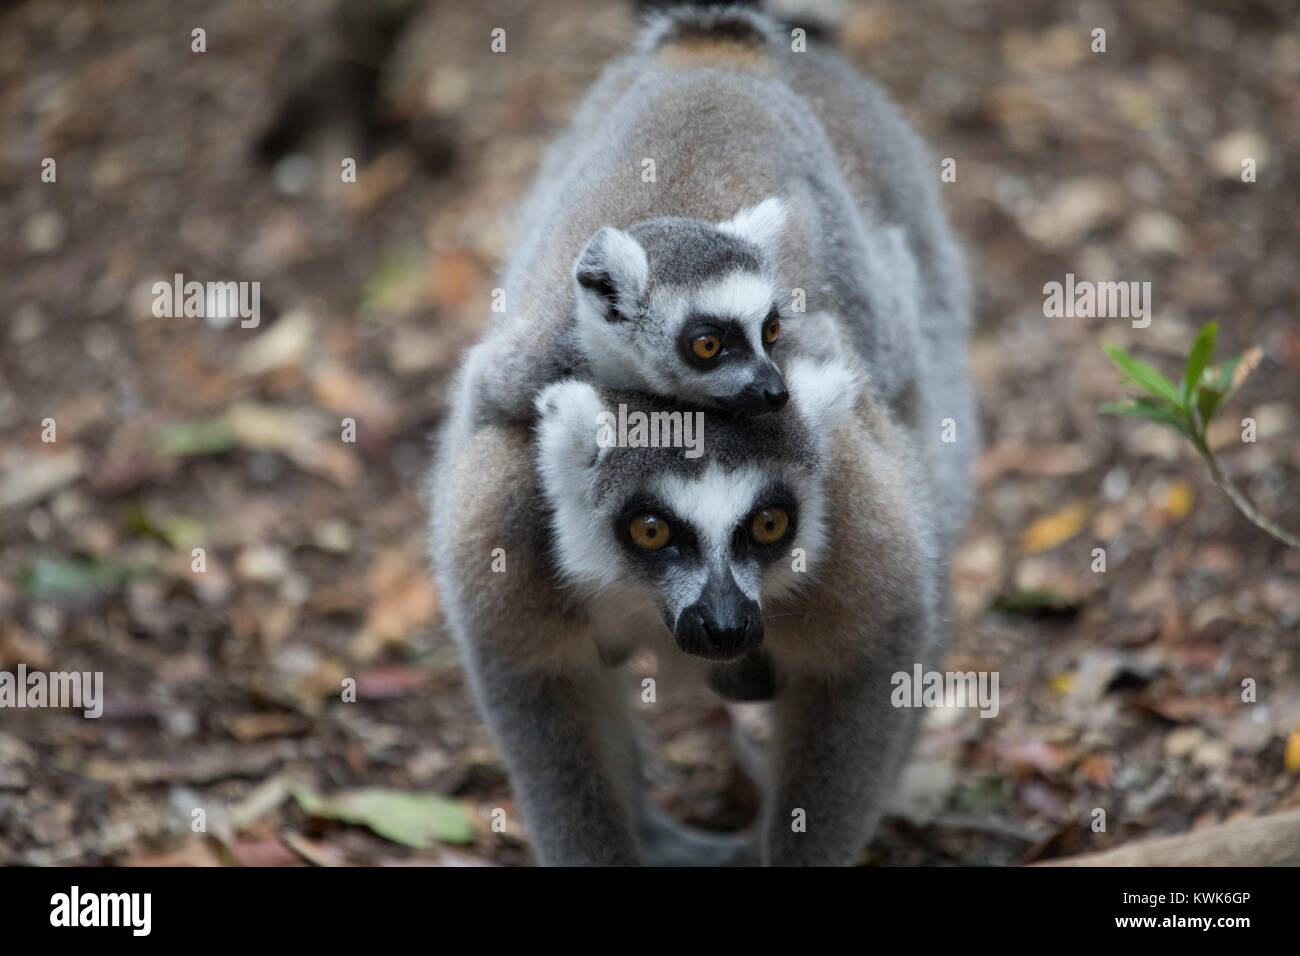 Madagascar ring-tailed lemur (Lemur catta) from the Monkeyland Sanctuary in  Plettenberg Bay, South Africa. A free roaming multi-specie park Stock Photo  - Alamy